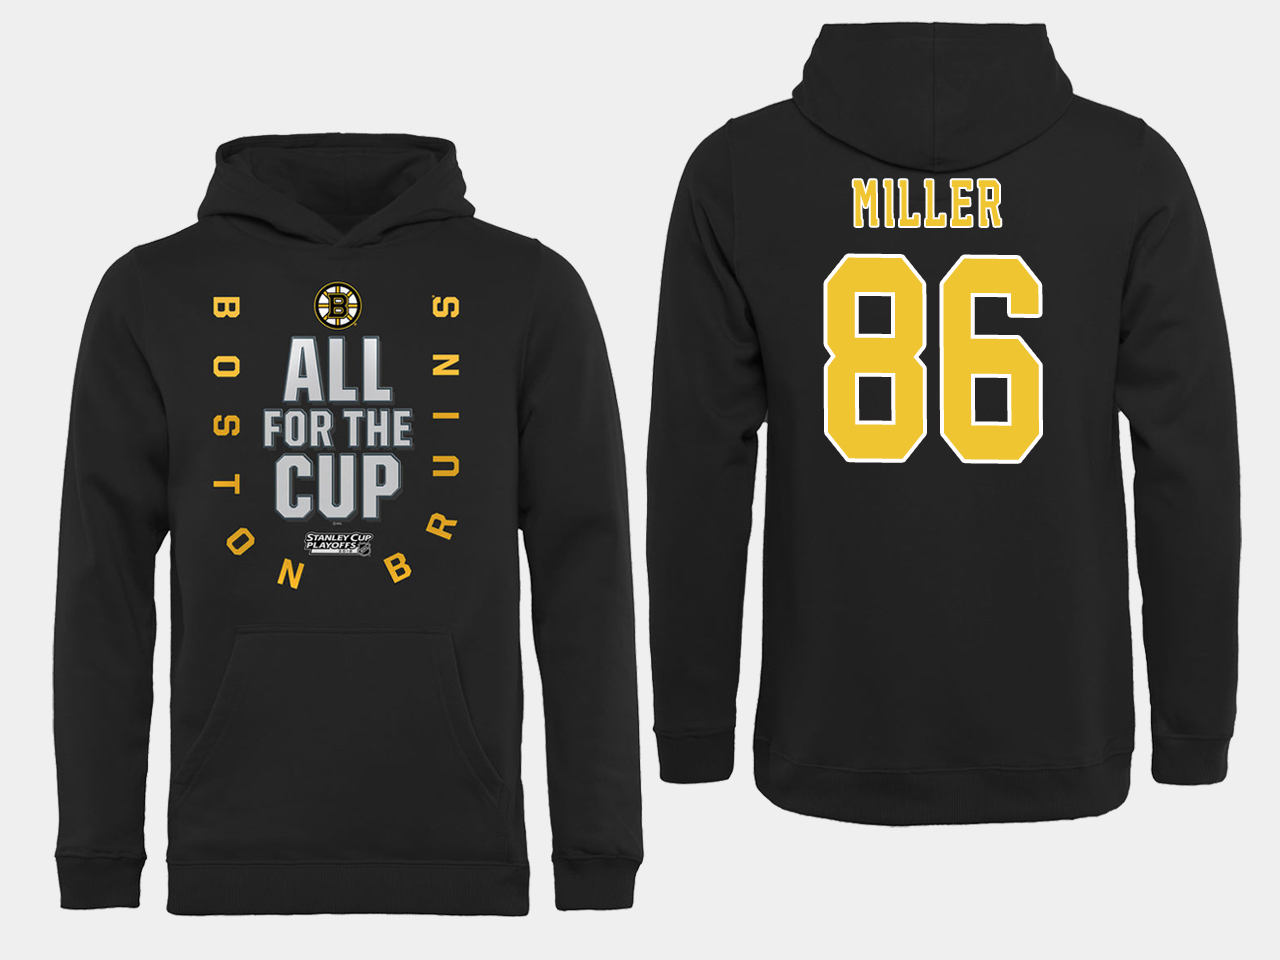 NHL Men Boston Bruins #86 Miller Black All for the Cup Hoodie